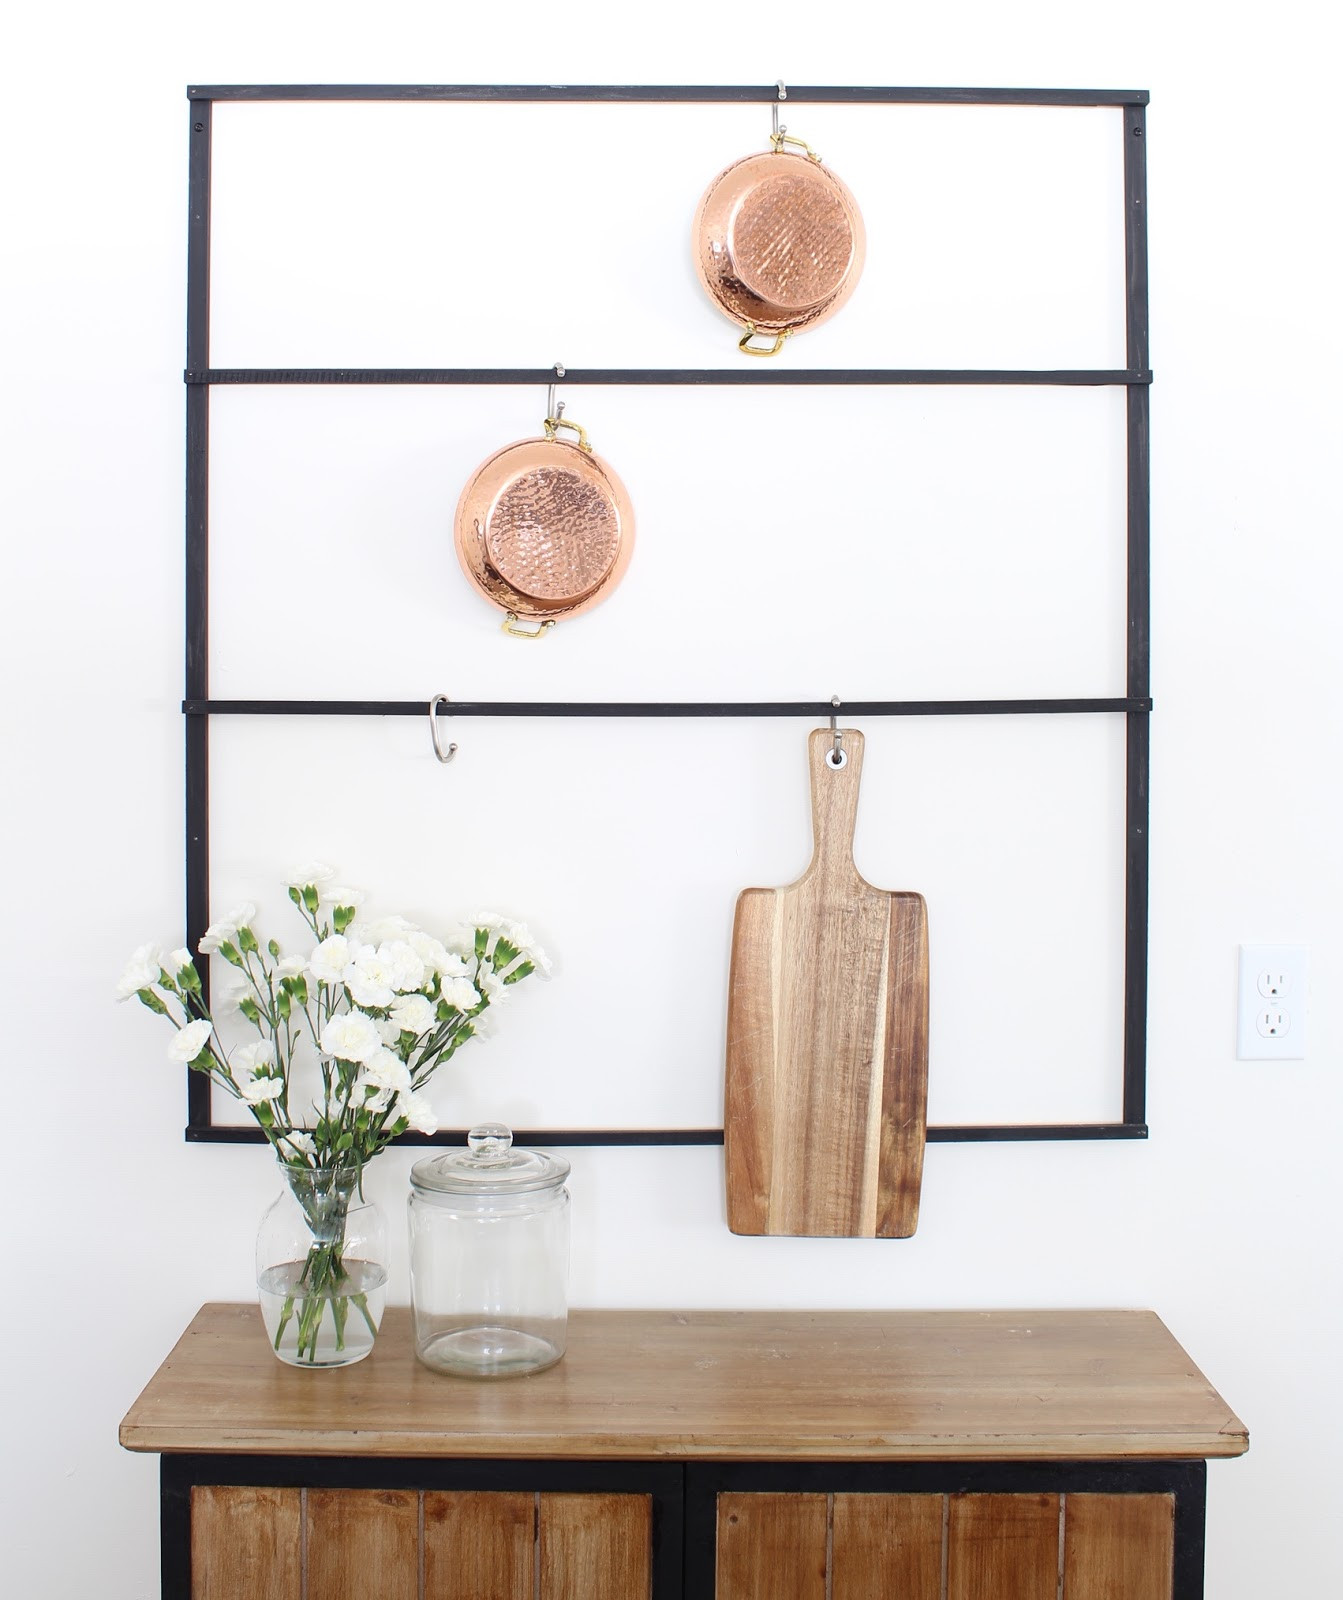 DIY Wall Mounted Pot Rack
 DIY Wall Mounted Pot Rack Harlow & Thistle Home Design